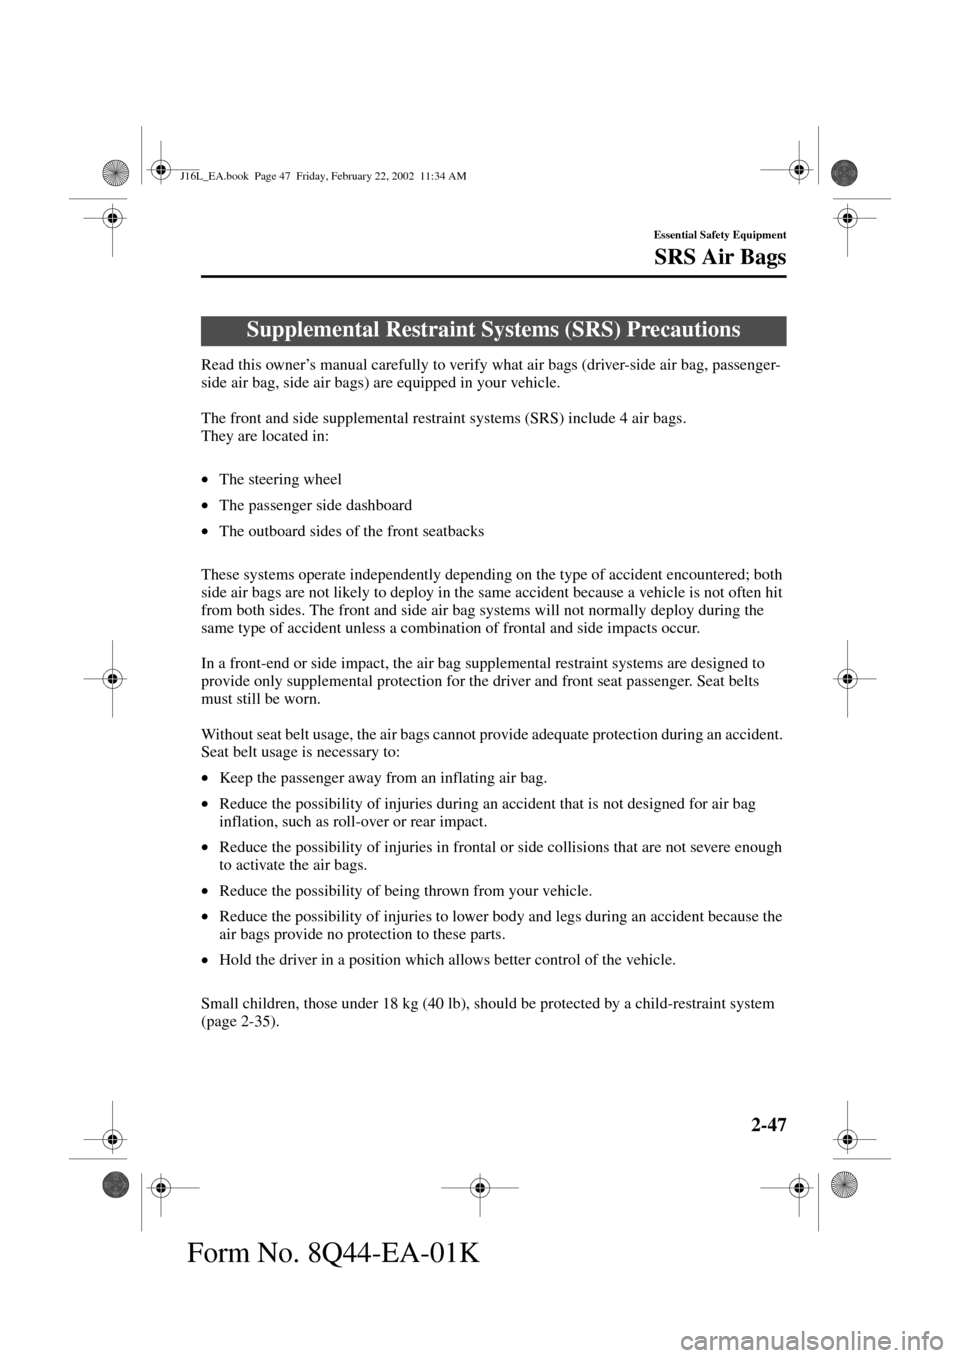 MAZDA MODEL MPV 2002  Owners Manual (in English) 2-47
Essential Safety Equipment
Form No. 8Q44-EA-01K
SRS Air Bags
Read this owner’s manual carefully to verify what air bags (driver-side air bag, passenger-
side air bag, side air bags) are equippe